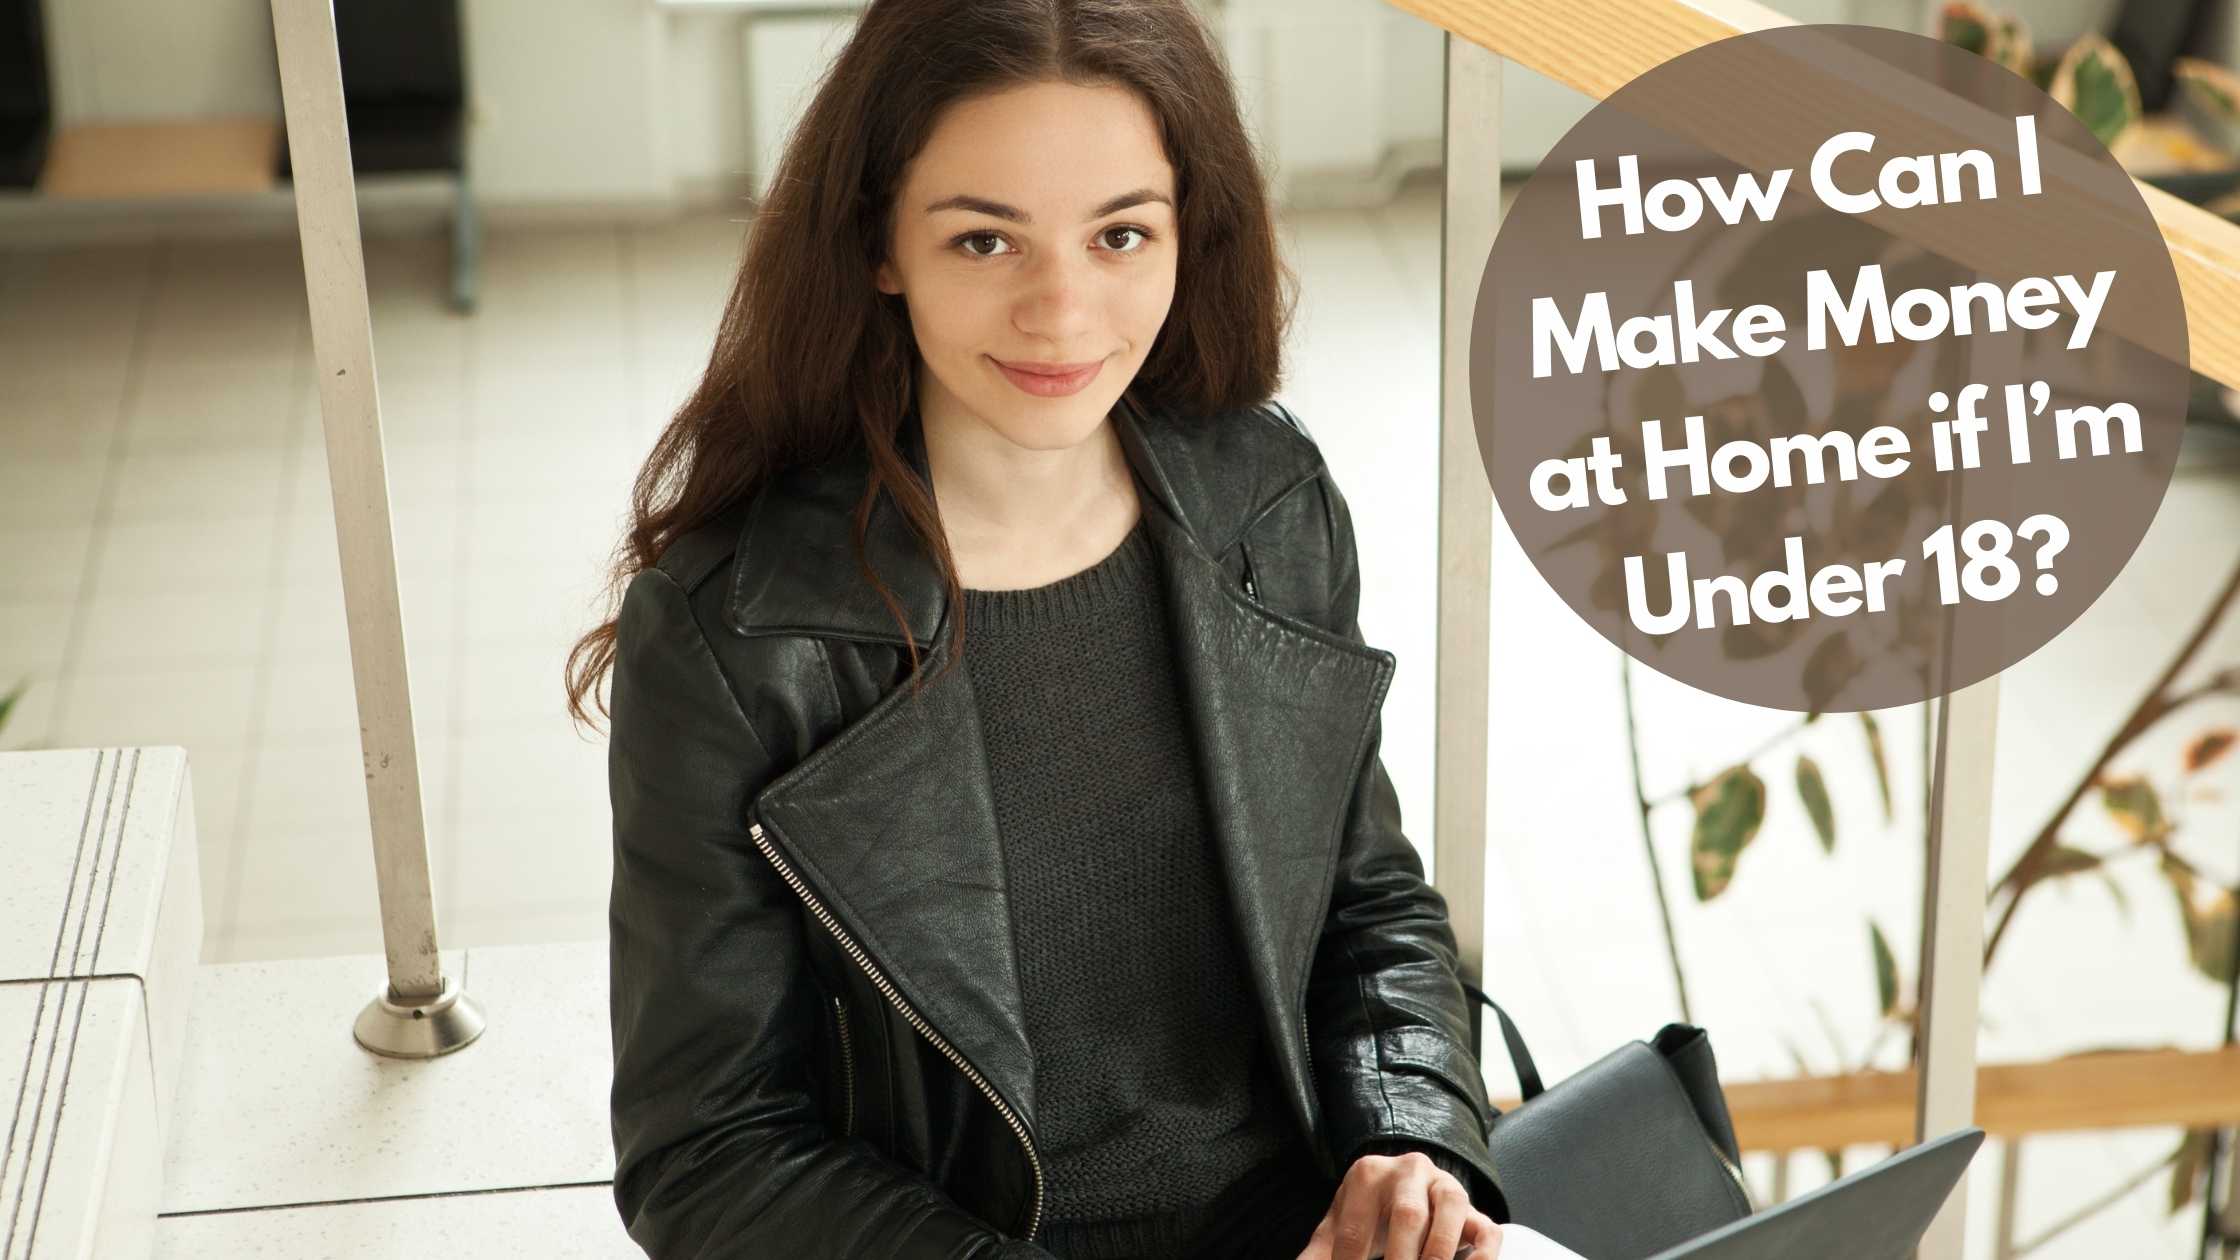 How Can I Make Money at Home if I’m Under 18?